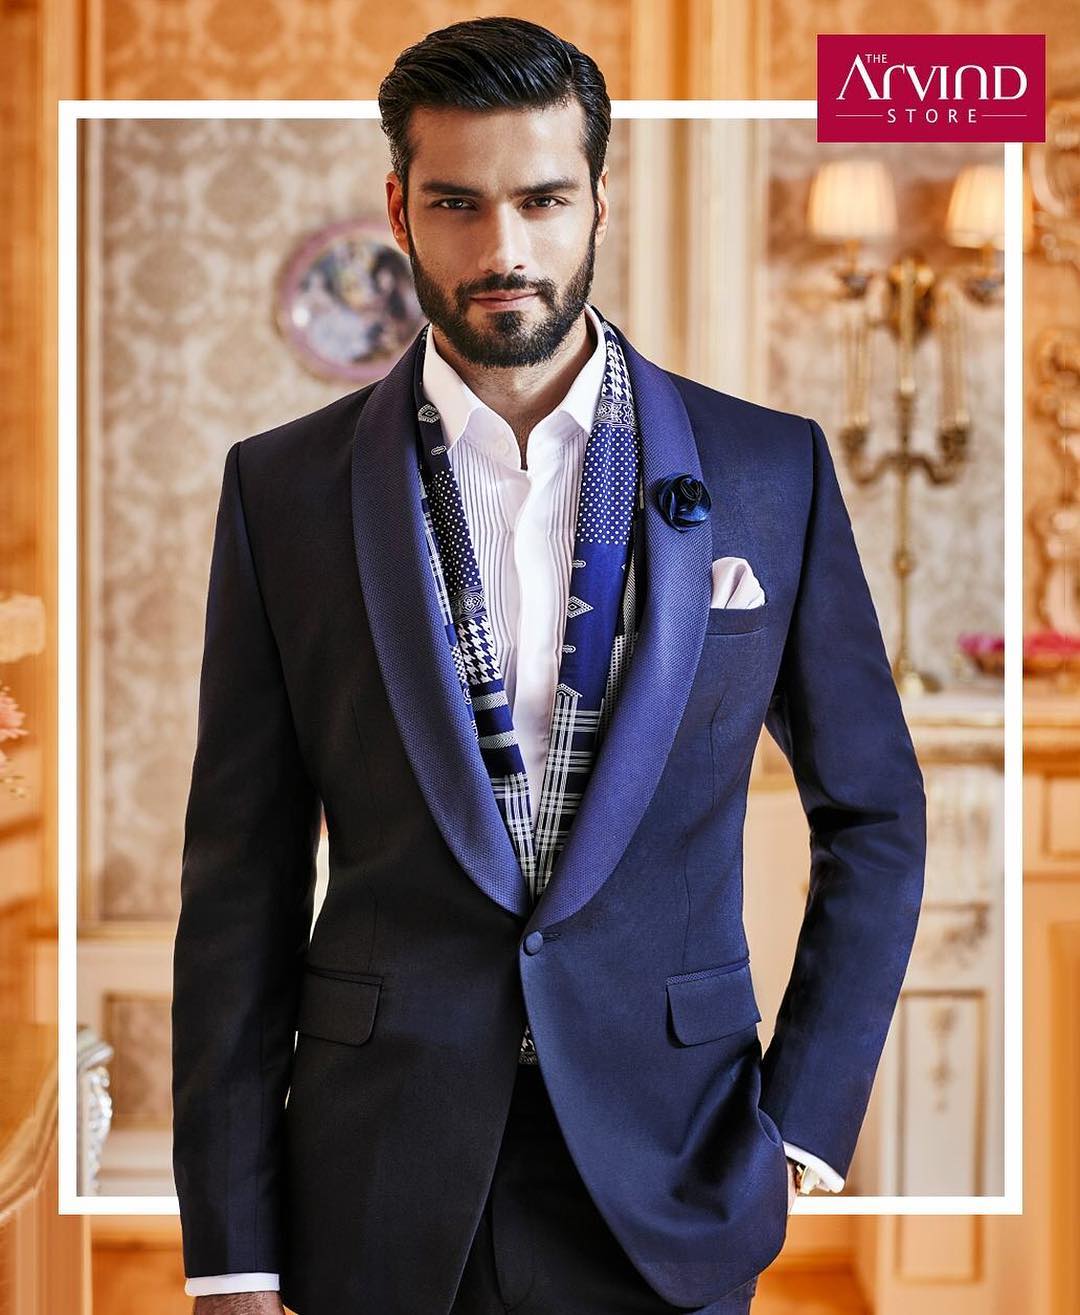 Celebrate every moment of the joyful occasion and flaunt your style with our latest Ceremonial Collection. Visit our stores today - Link in Bio

#celebrationwear #weddingwear #suits #royal #weddingsuits #bestdressed #menswear #handcrafted #groomsuit #designersuits #exclusive